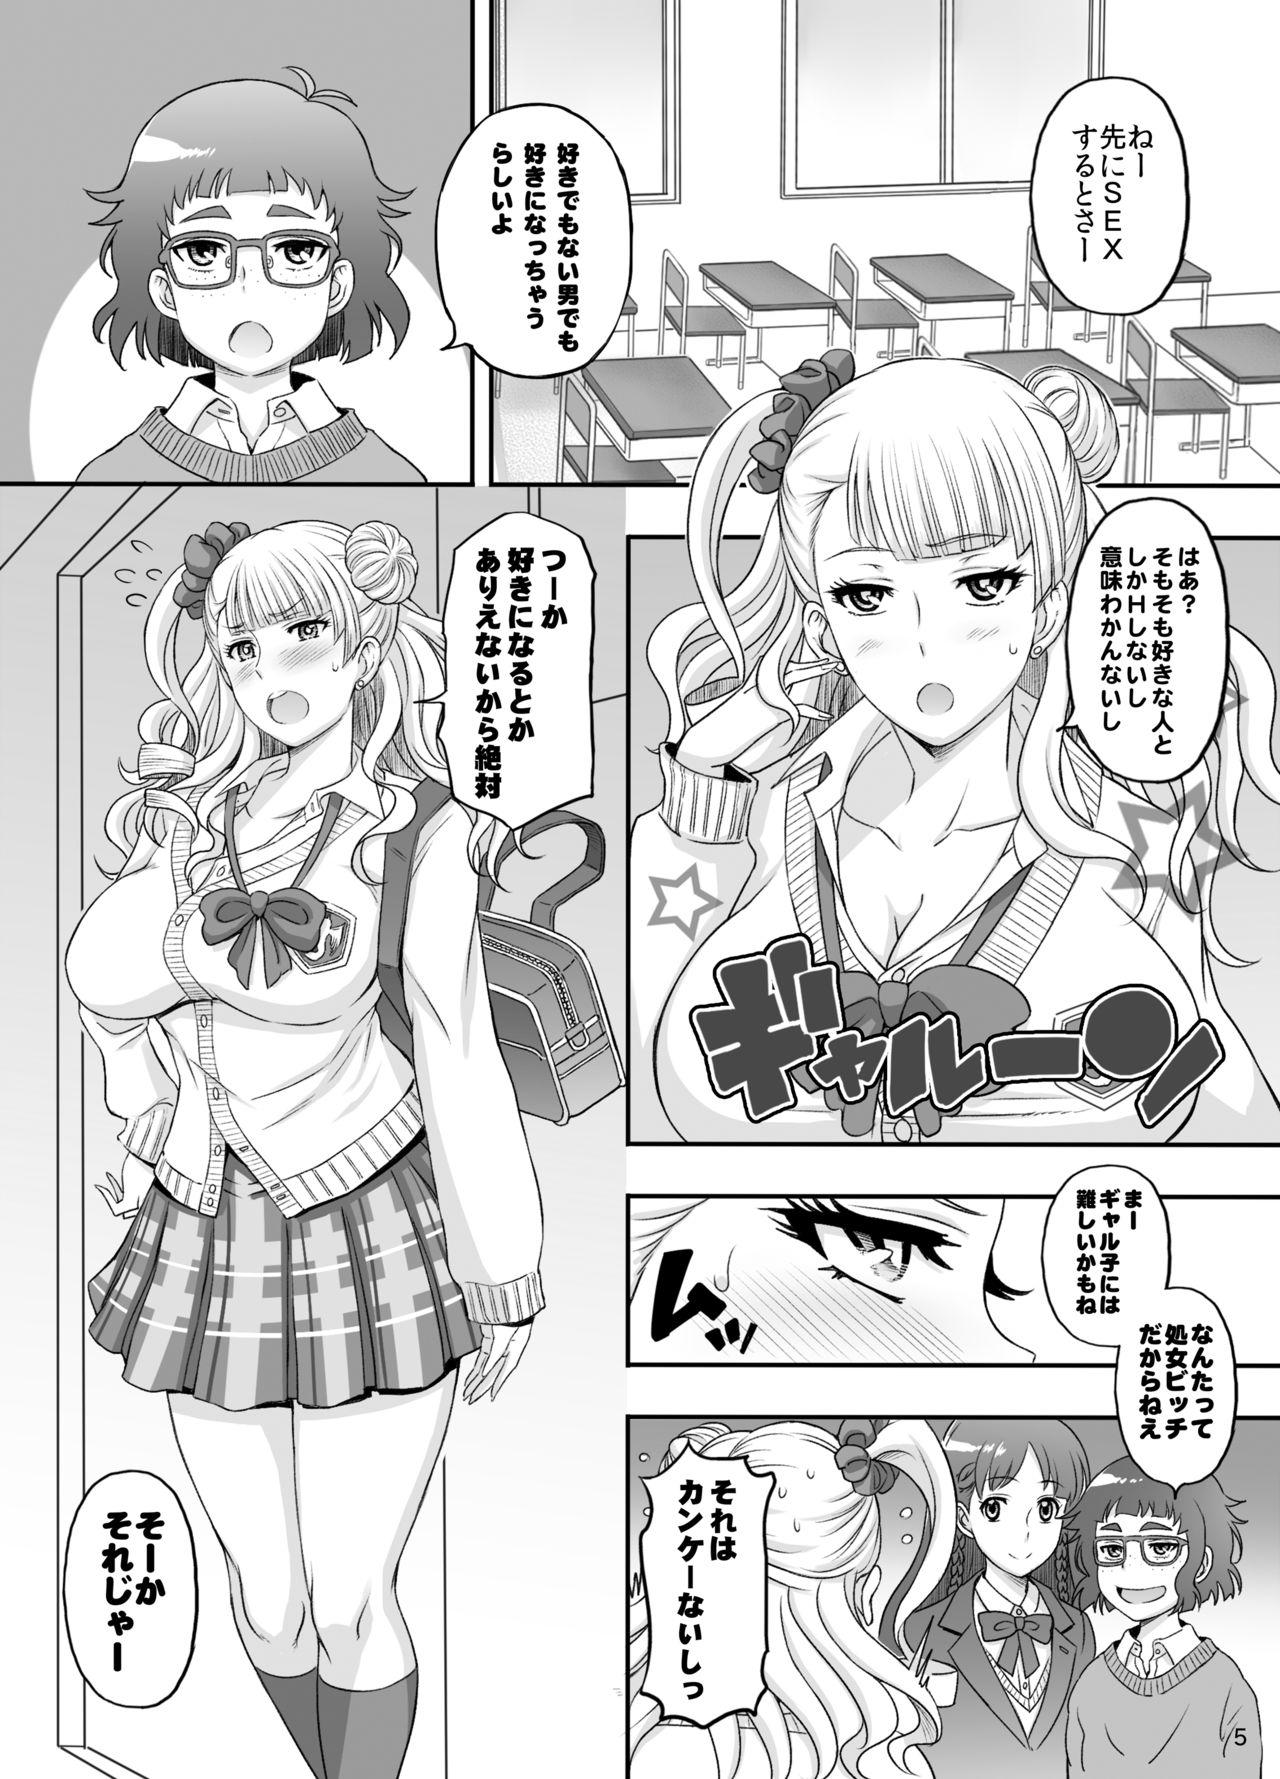 Missionary Position Porn ○○○ shite! Galko-chan - Oshiete galko-chan Behind - Page 4